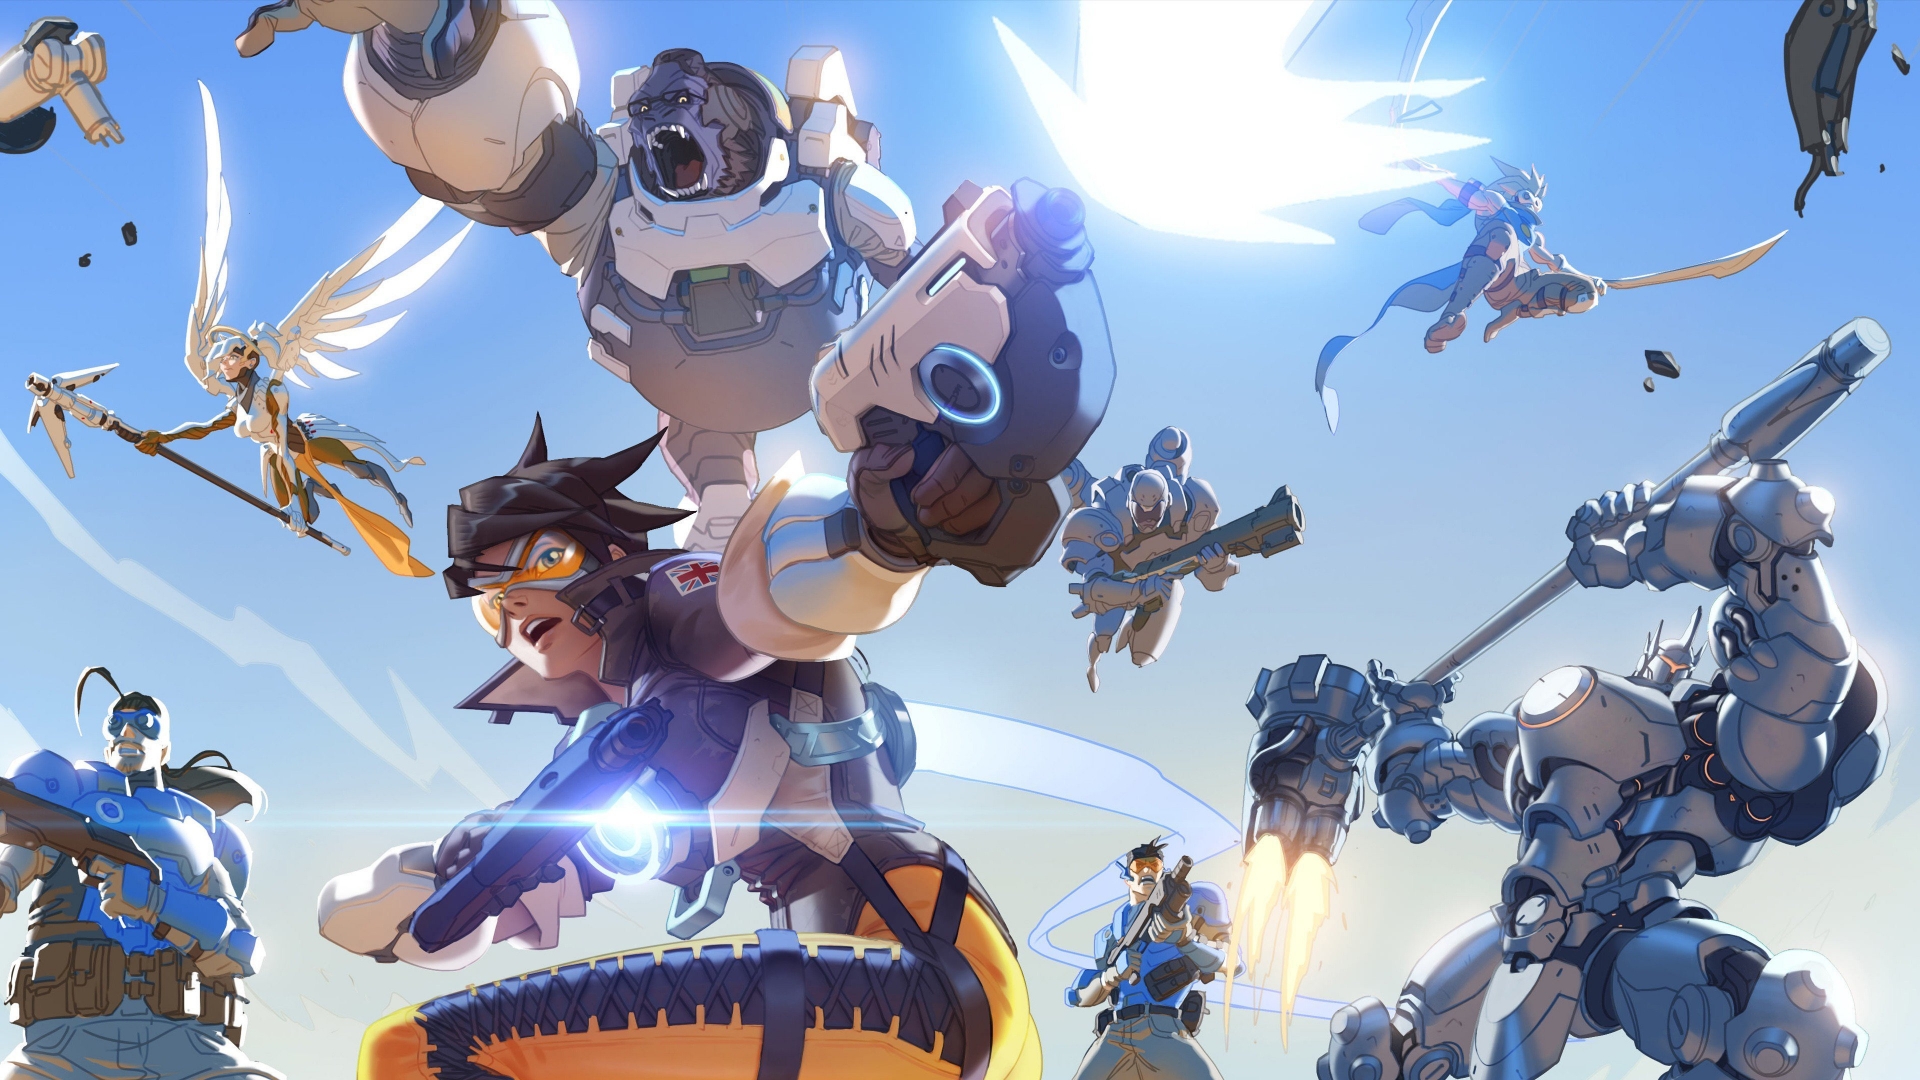 More Overwatch 2 Details Leaked Ahead of BlizzCon 2019